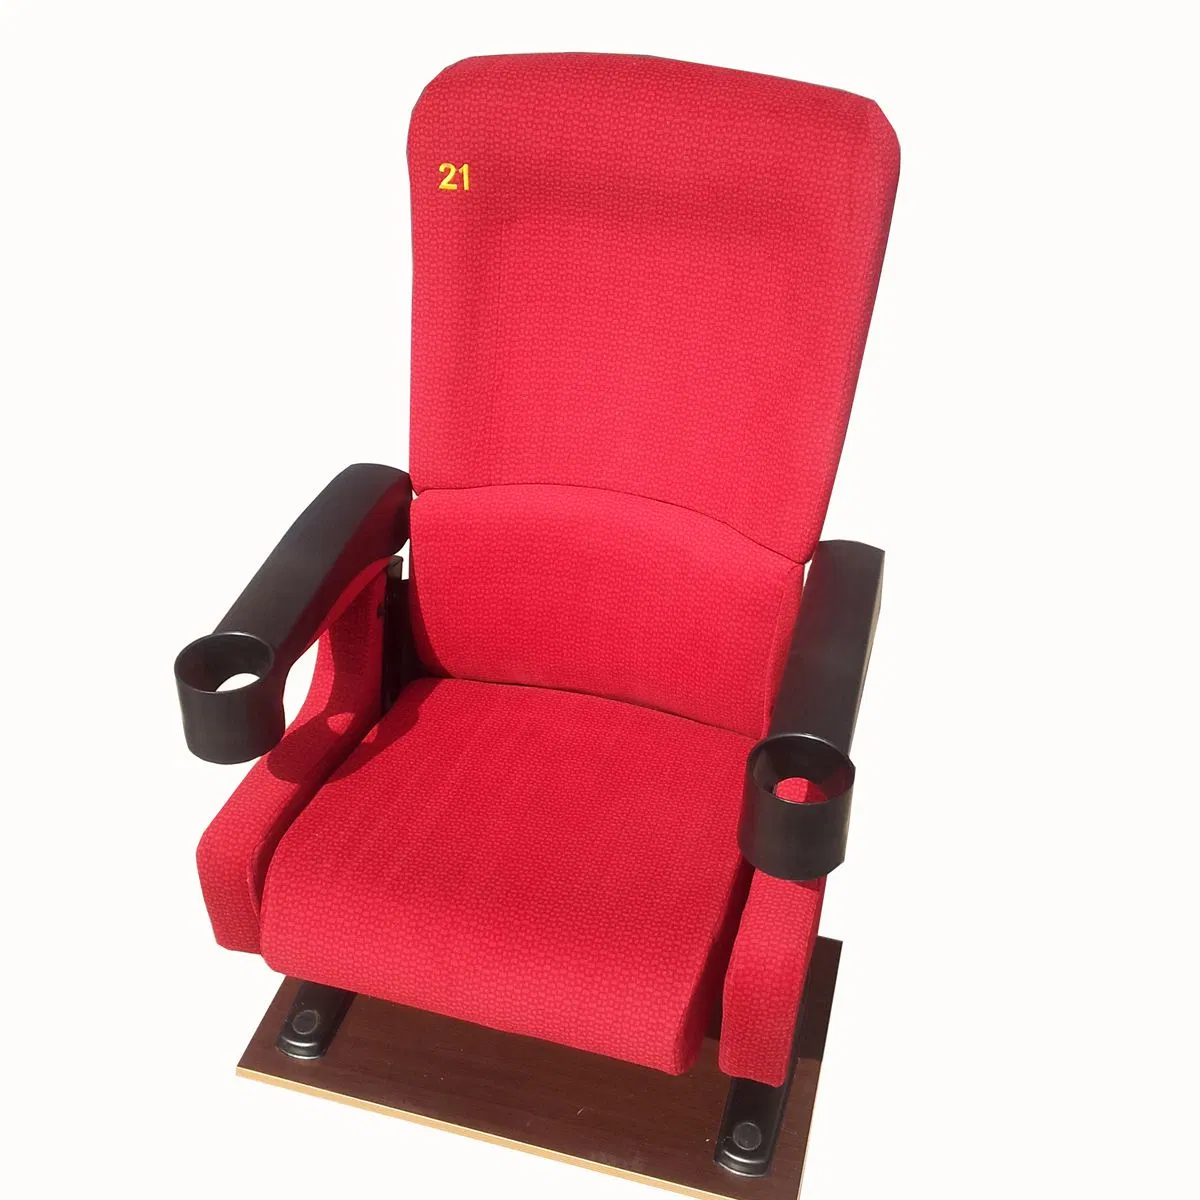 Cinema Chair Waiting Concert Church Stadium Lecture Meeting Conference School University College Auditorium Hall Seating Full Rocking Film Movie Theater Seat